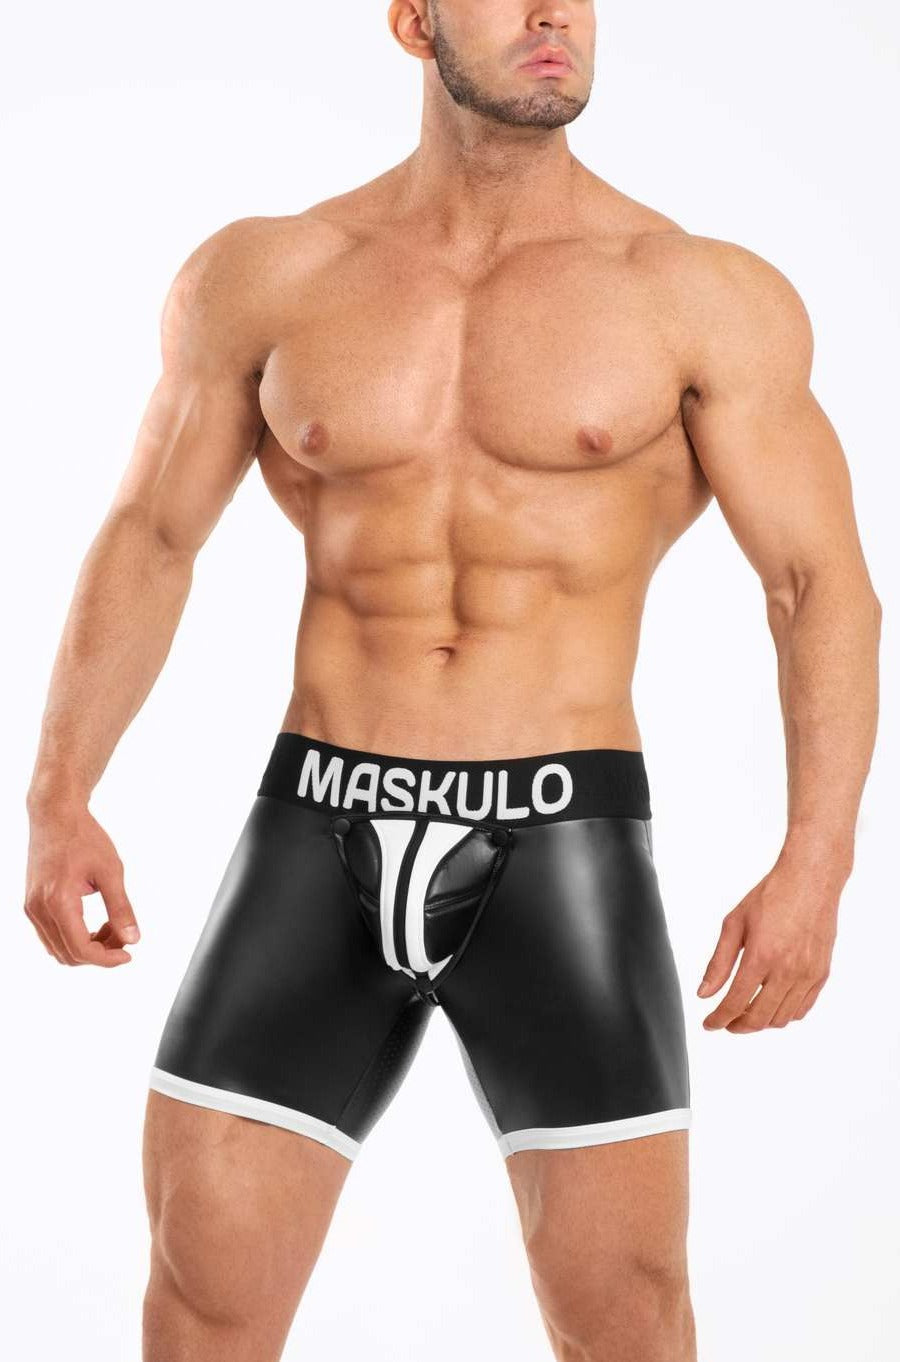 Basic Shorts with Pads. Zippered rear. Black+White